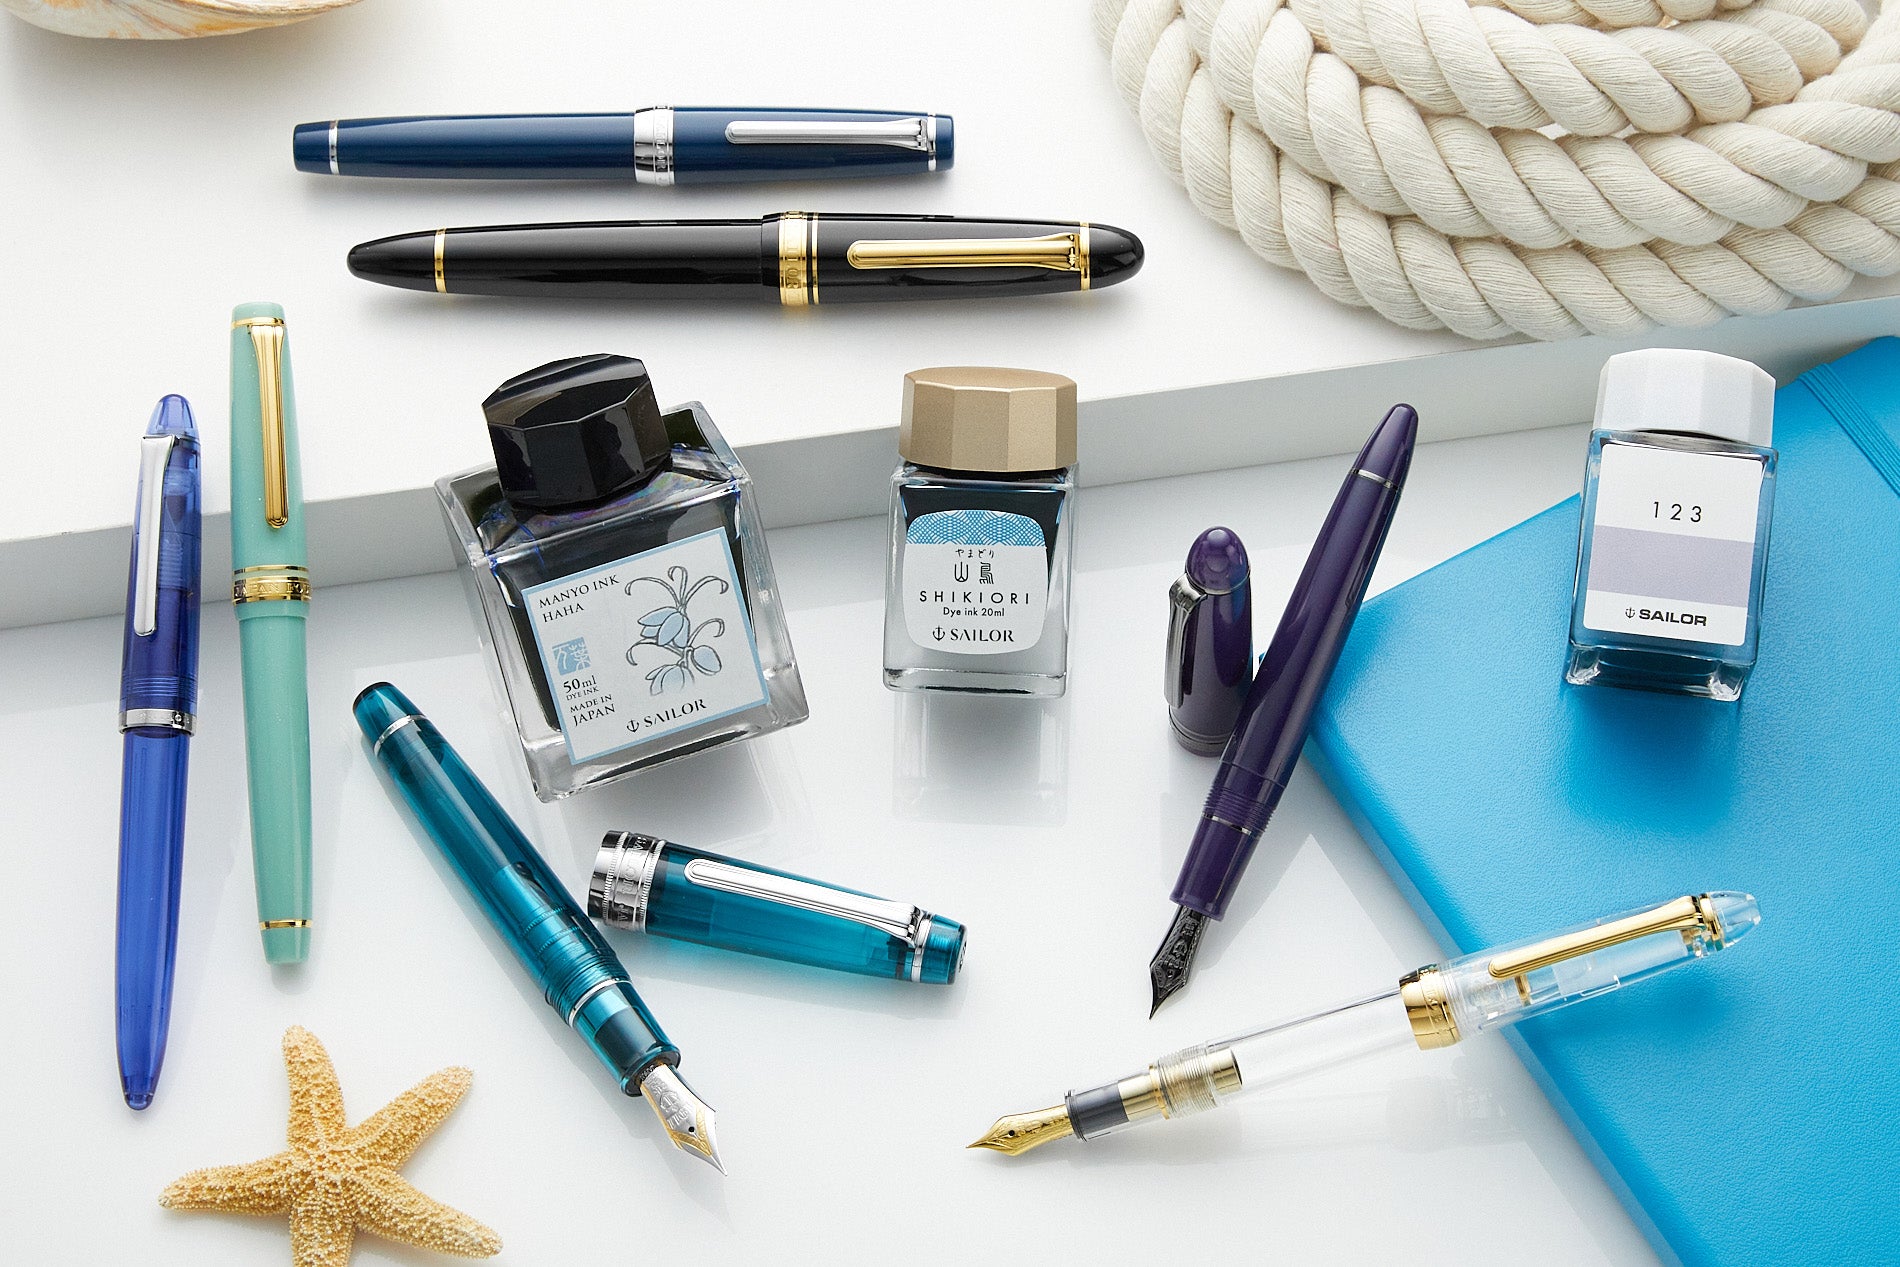 A variety of Sailor fountain pens and bottled inks